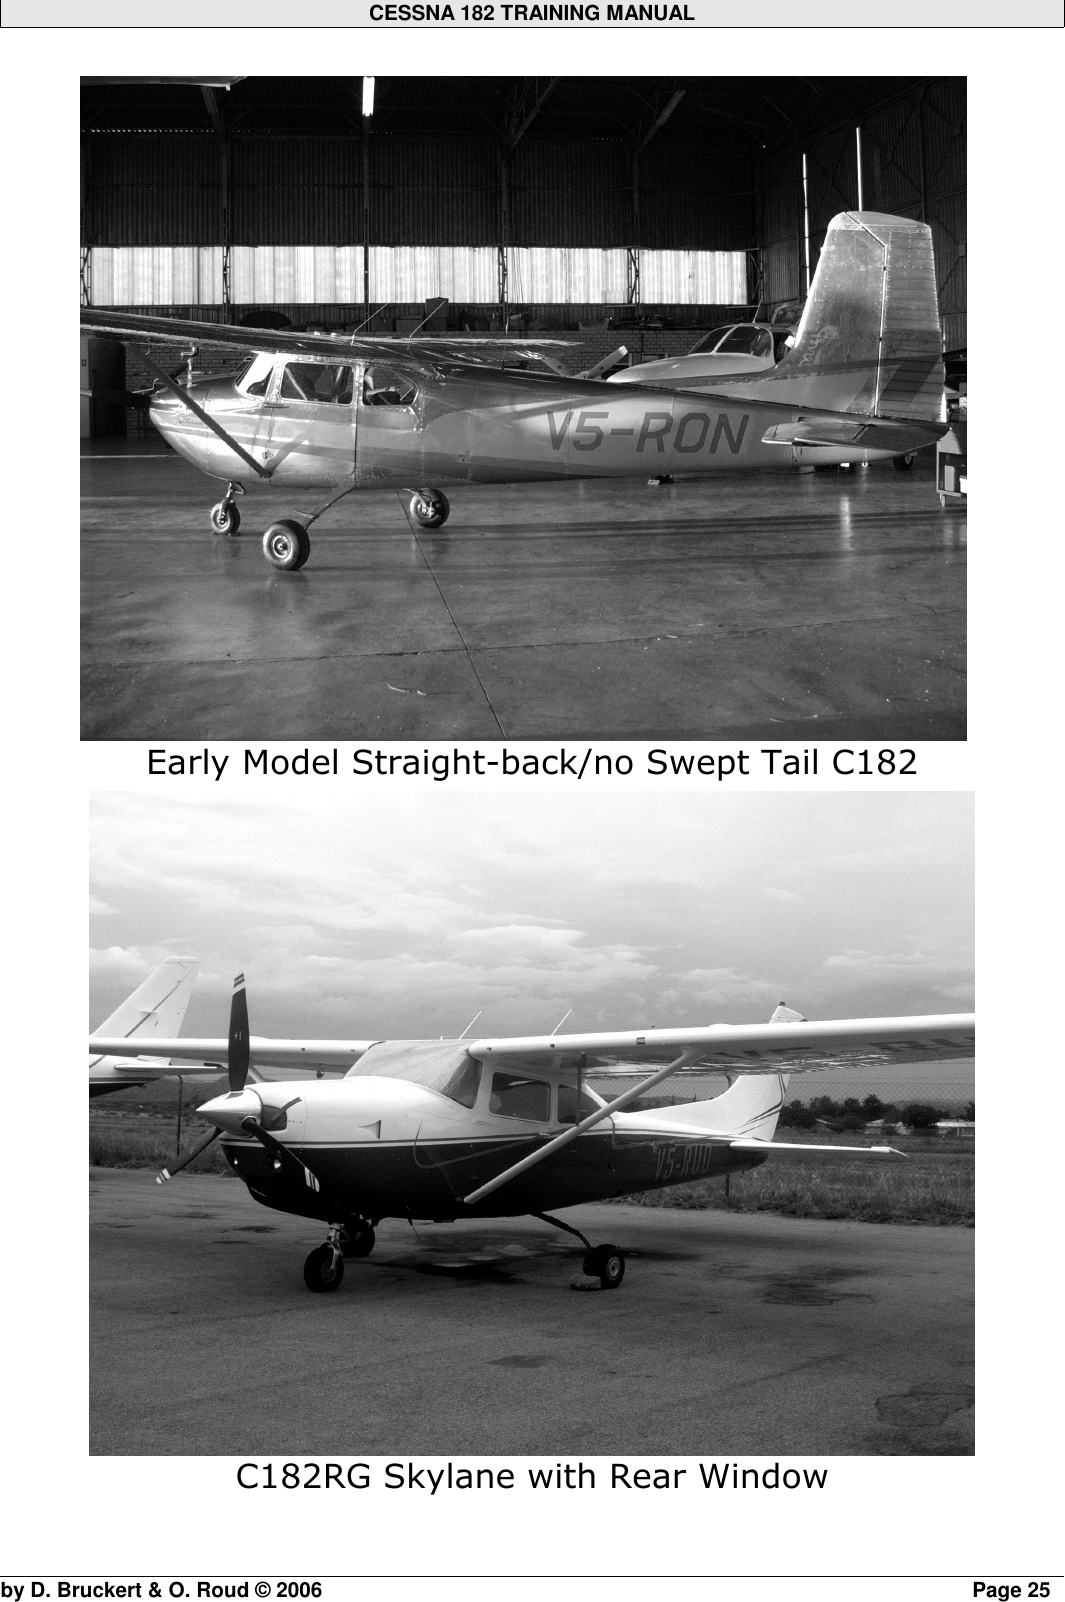 Page 12 of 12 - C182 Training Manual 1Jul2011 - Technical Cessna_C182--History_RSV-Training-Manuals_2011 Cessna C182--History RSV-Training-Manuals 2011